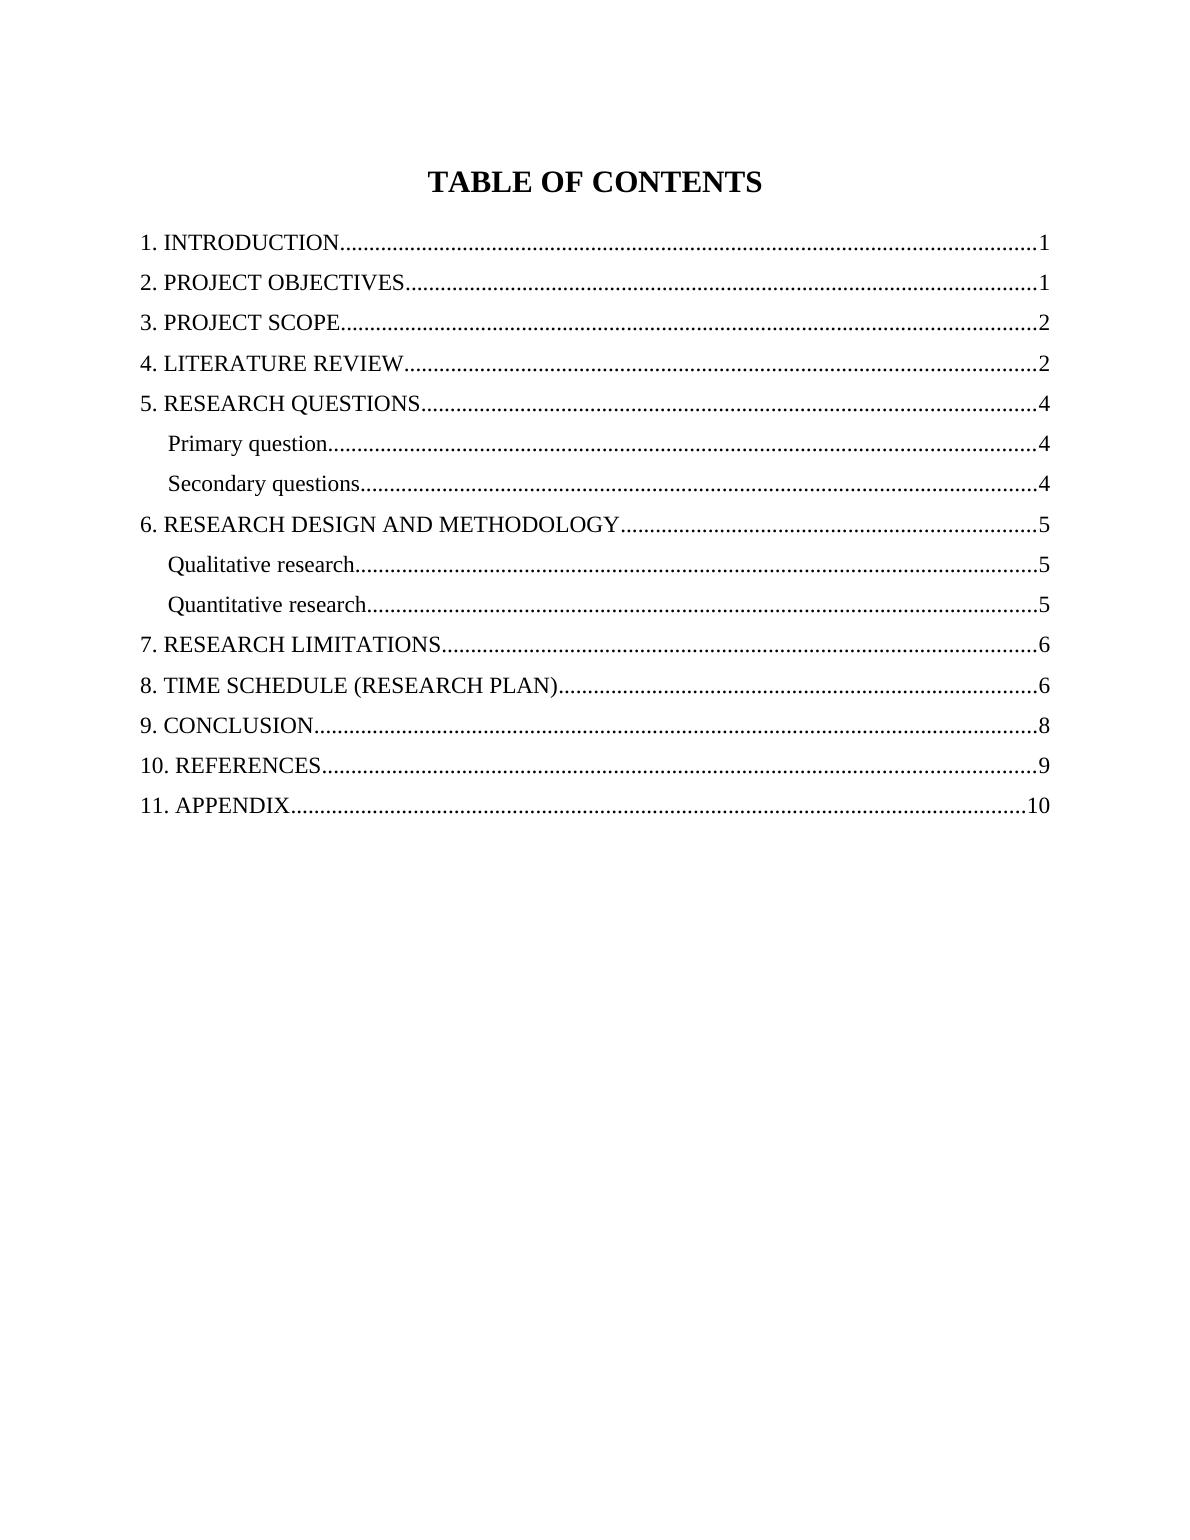 table of contents of research proposal